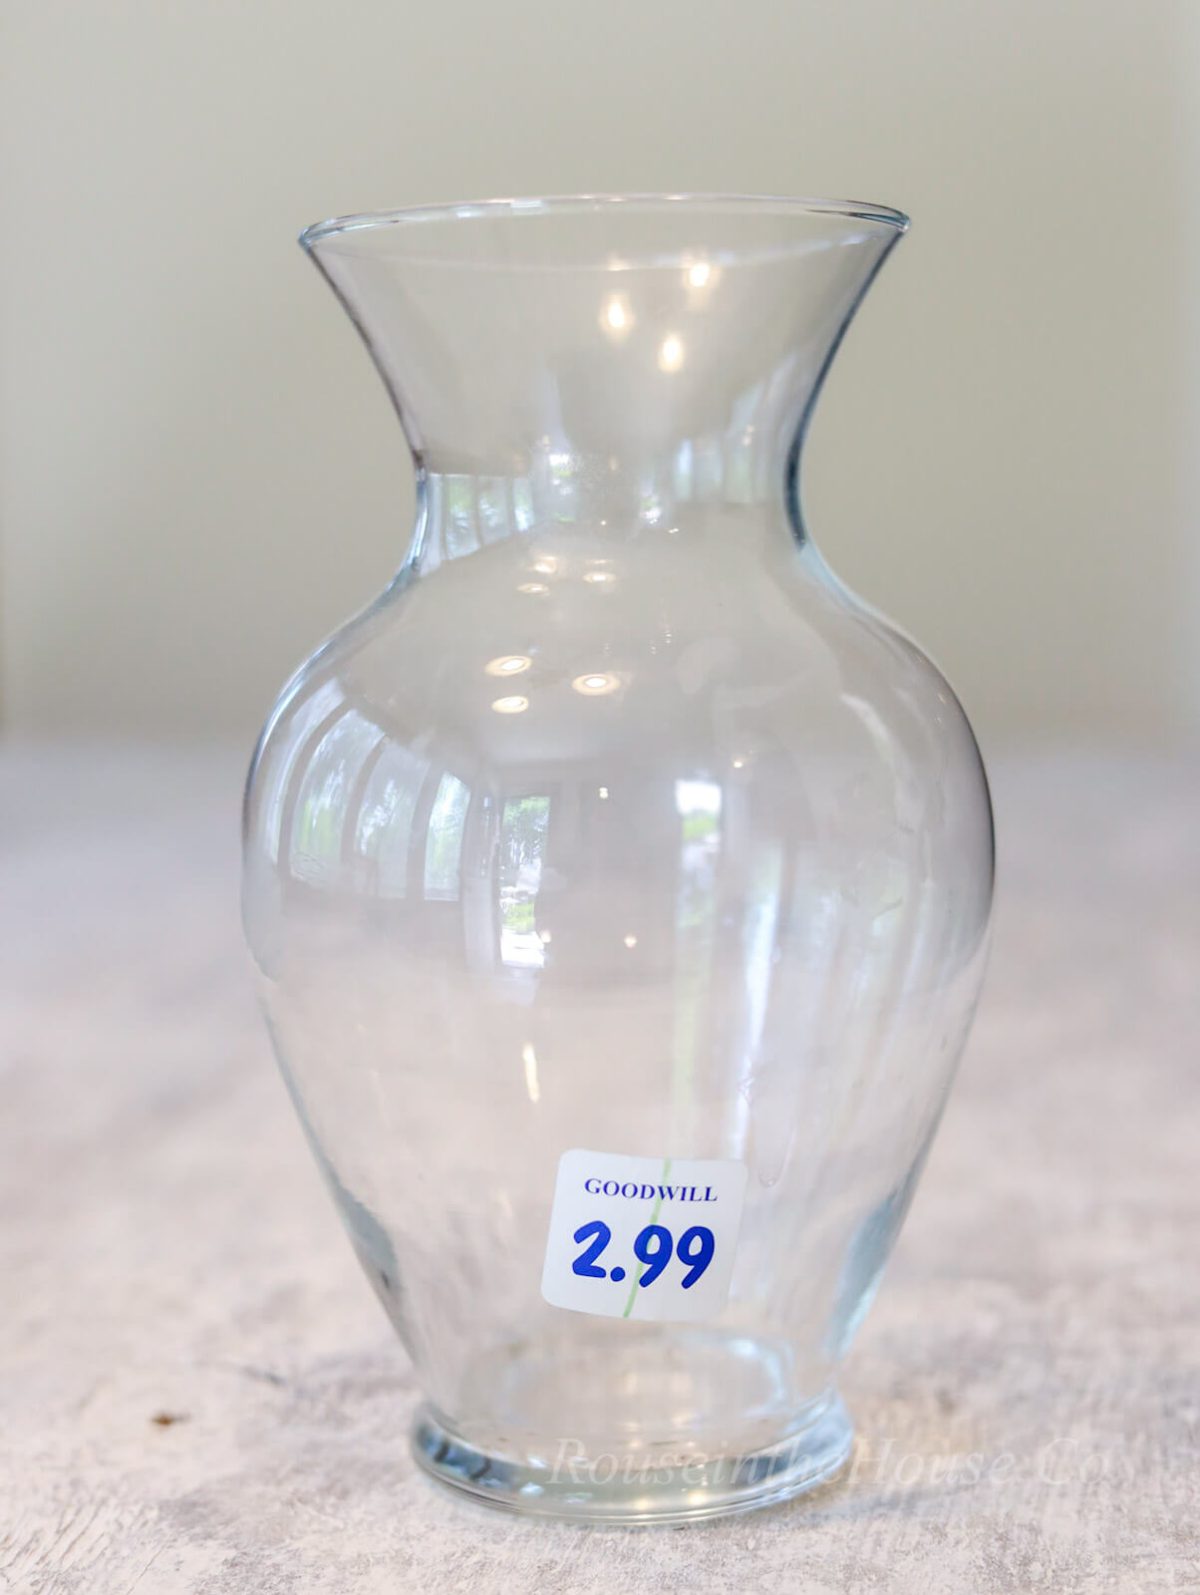 A curved glass vase from Goodwill, purchased for upcycling by etching in a French design.